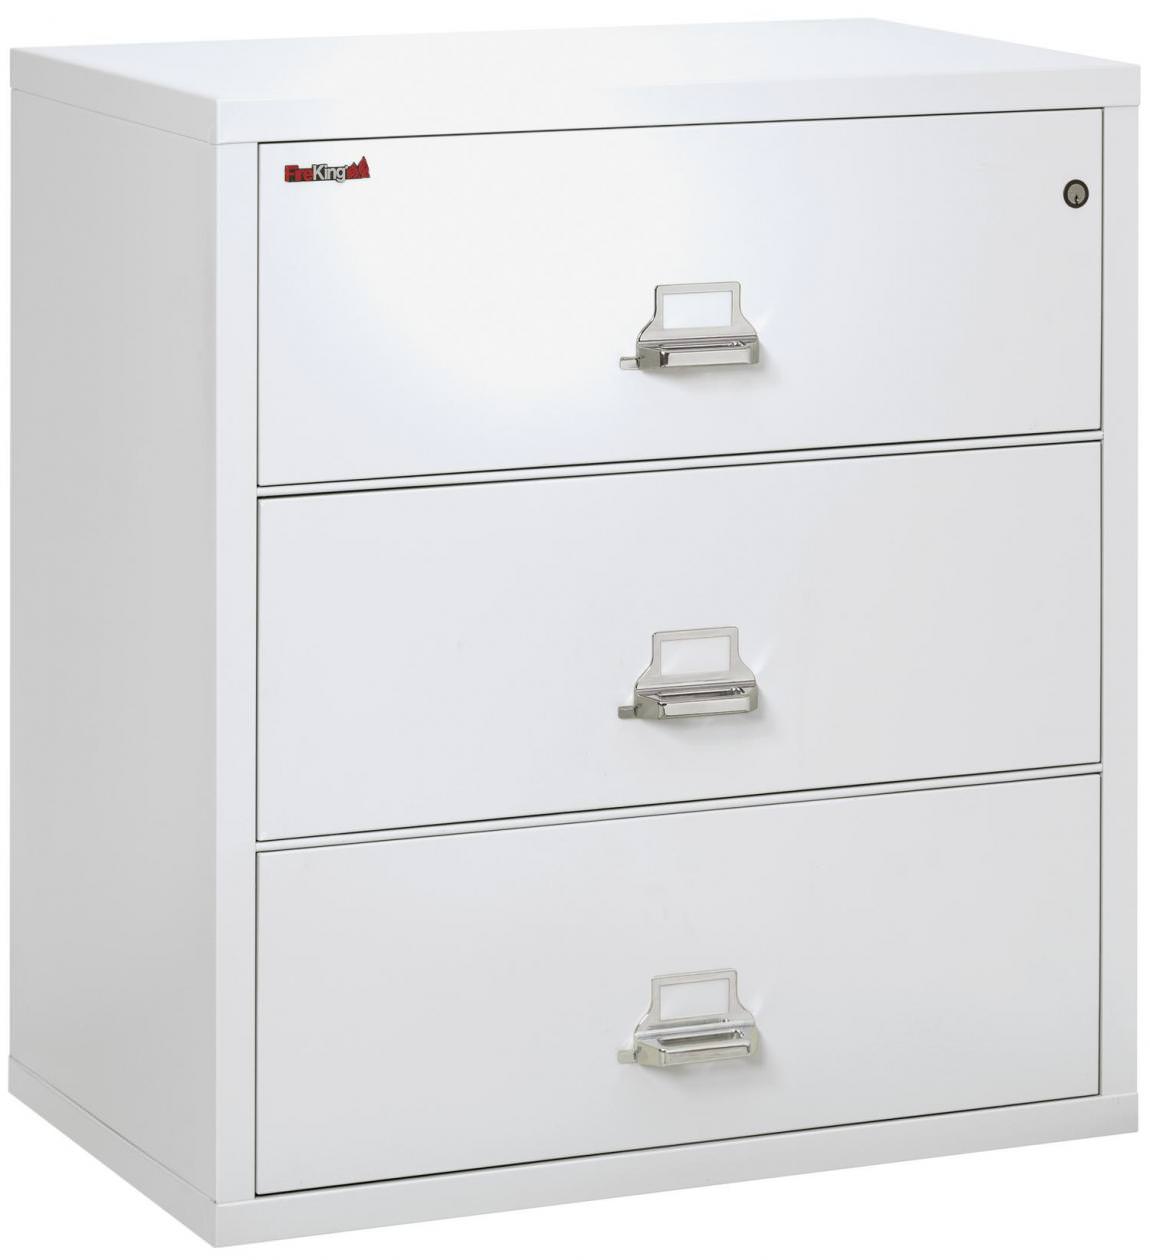 3 Drawer Fireproof Lateral File Cabinet - 38 Inch